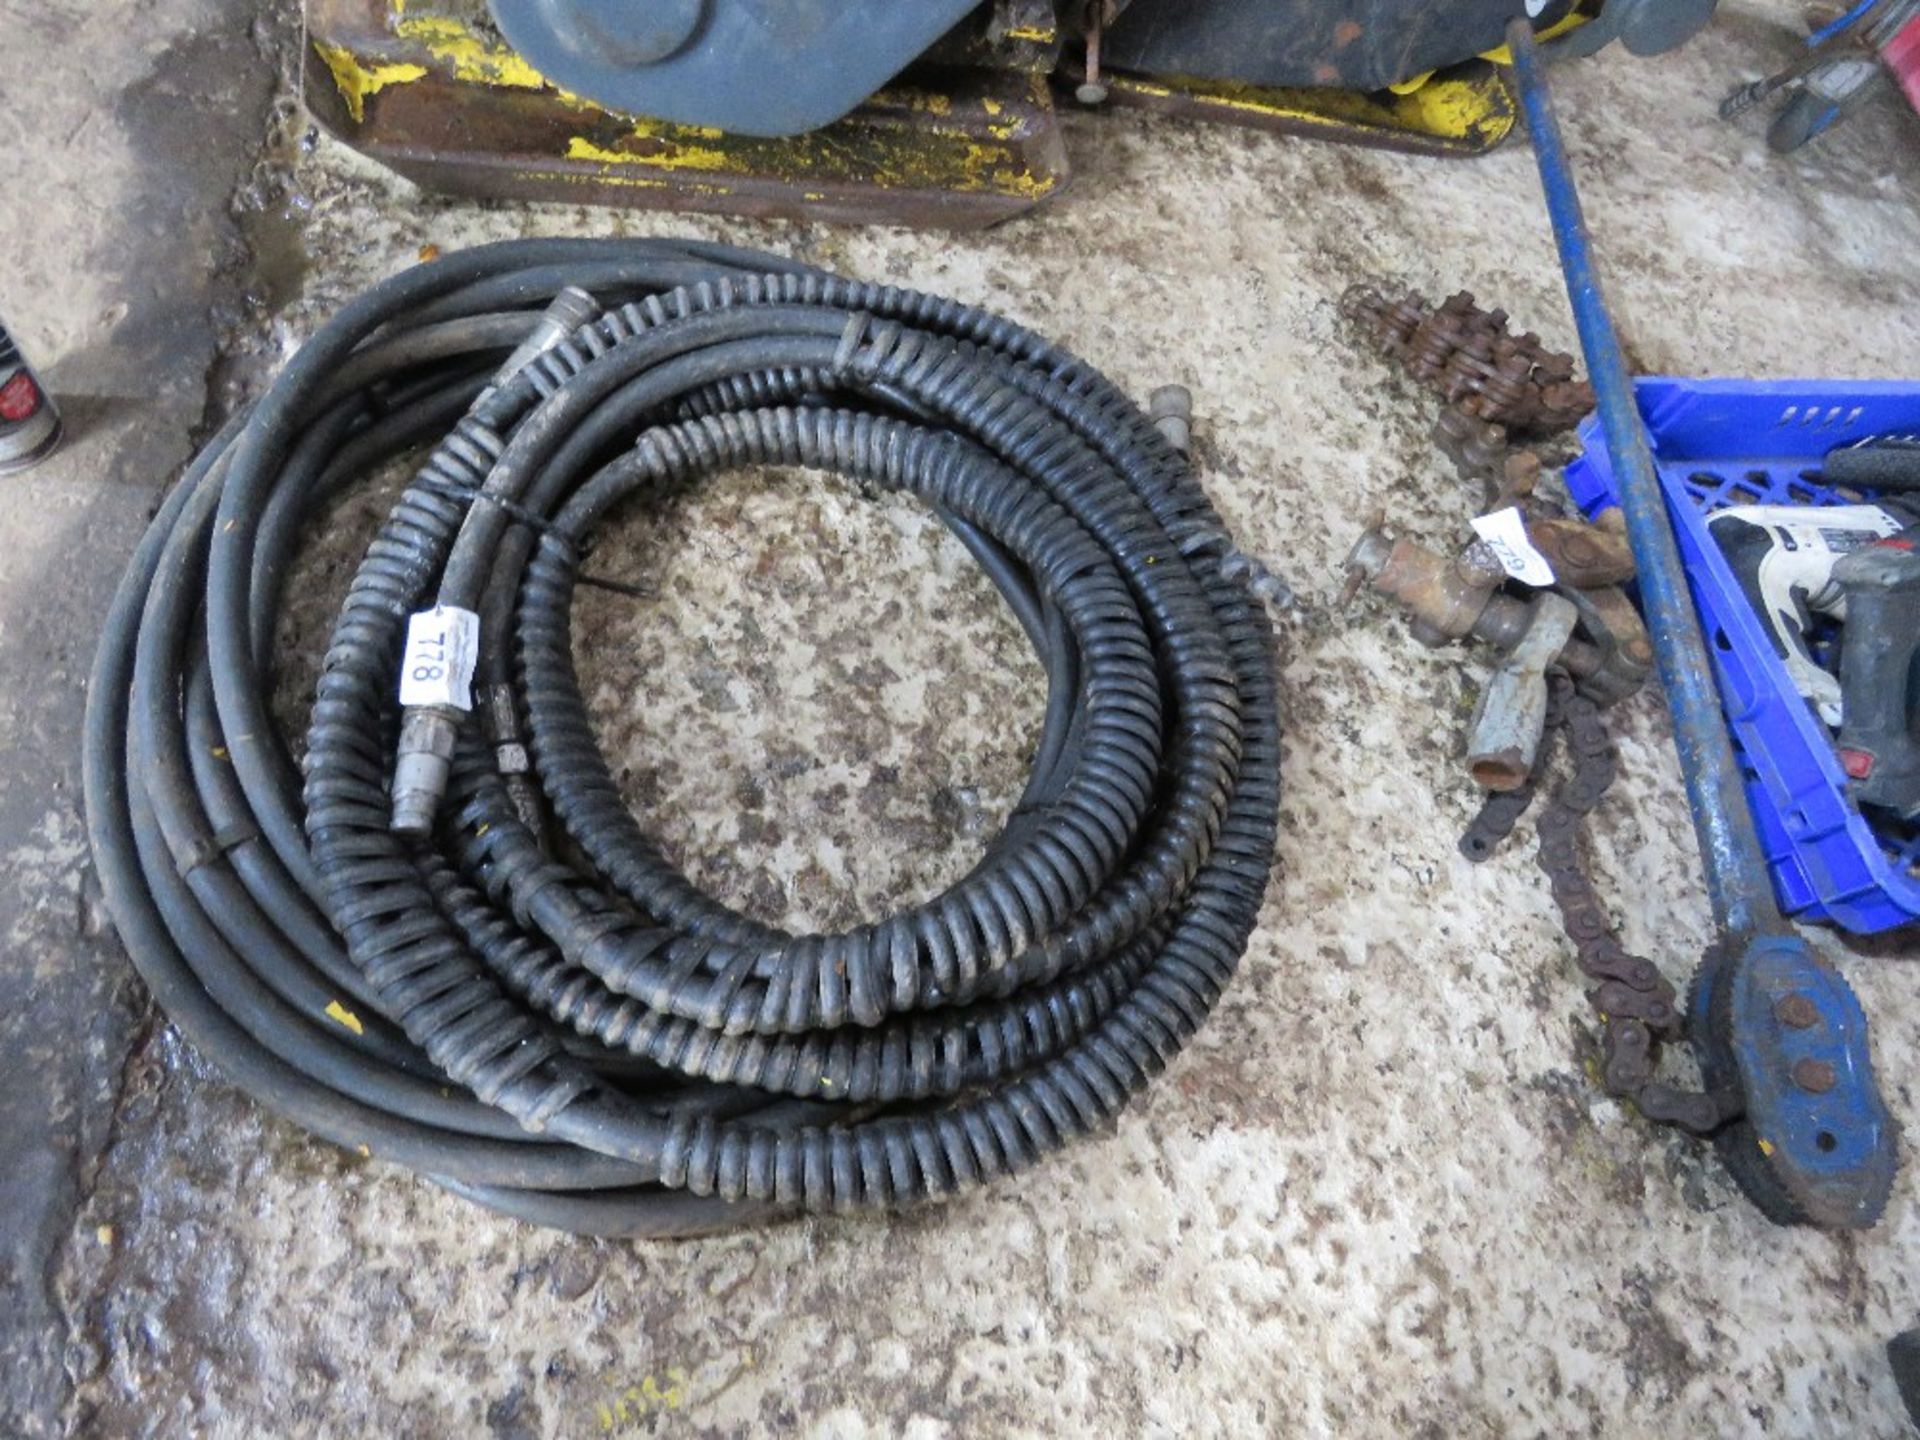 2 X SETS OF HYDRAULIC BREAKER PACK HOSES. - Image 2 of 3